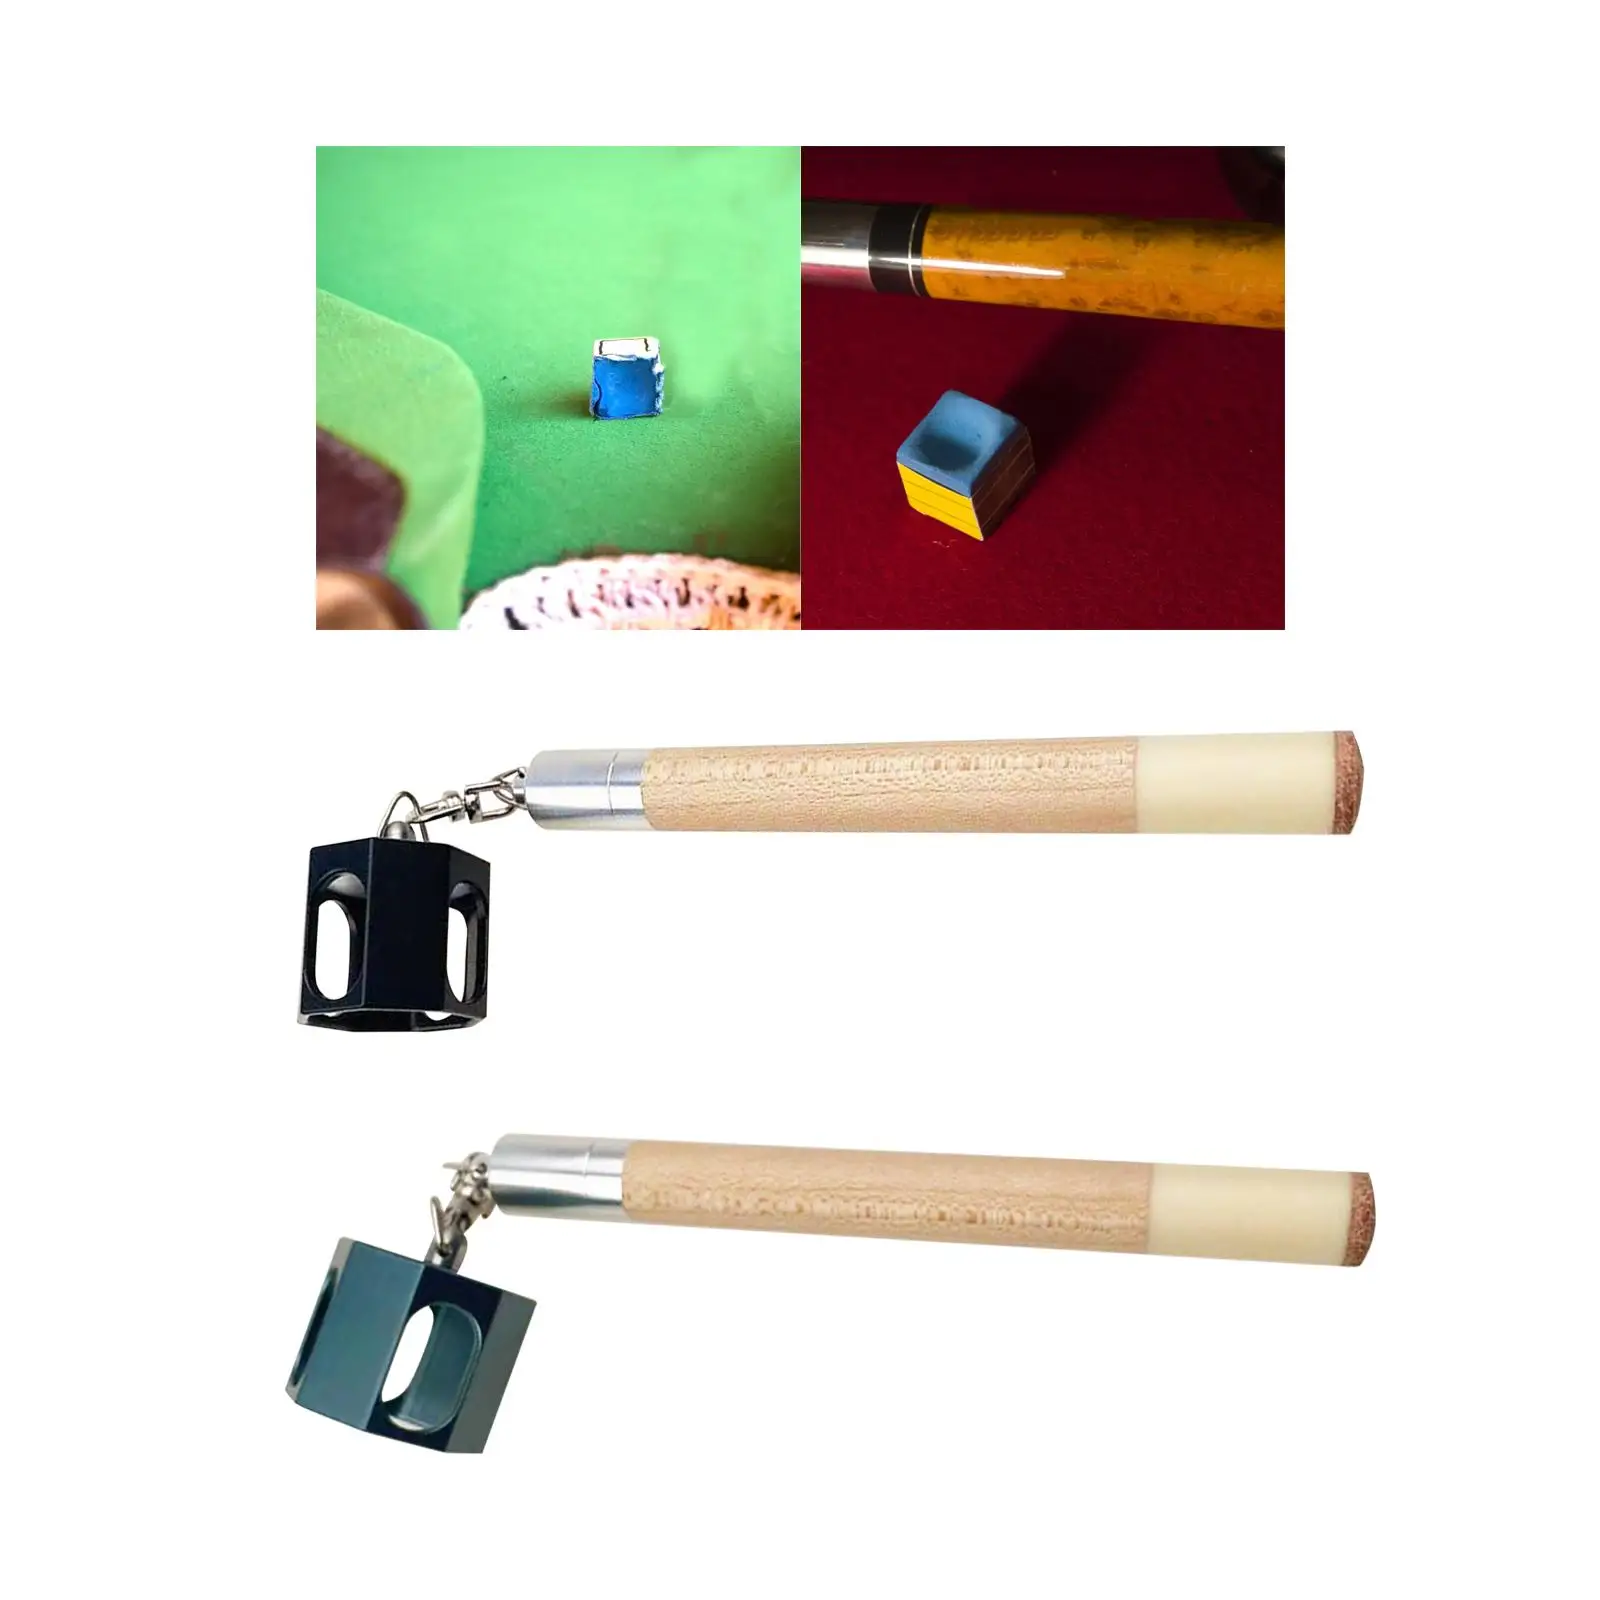 Billiards Snooker Pool Cue Chalk Holder 2 in 1 Pocket Chalkers Cup Holders Scuffer Tacker Billiard Cue Tip Tools for Table Ball